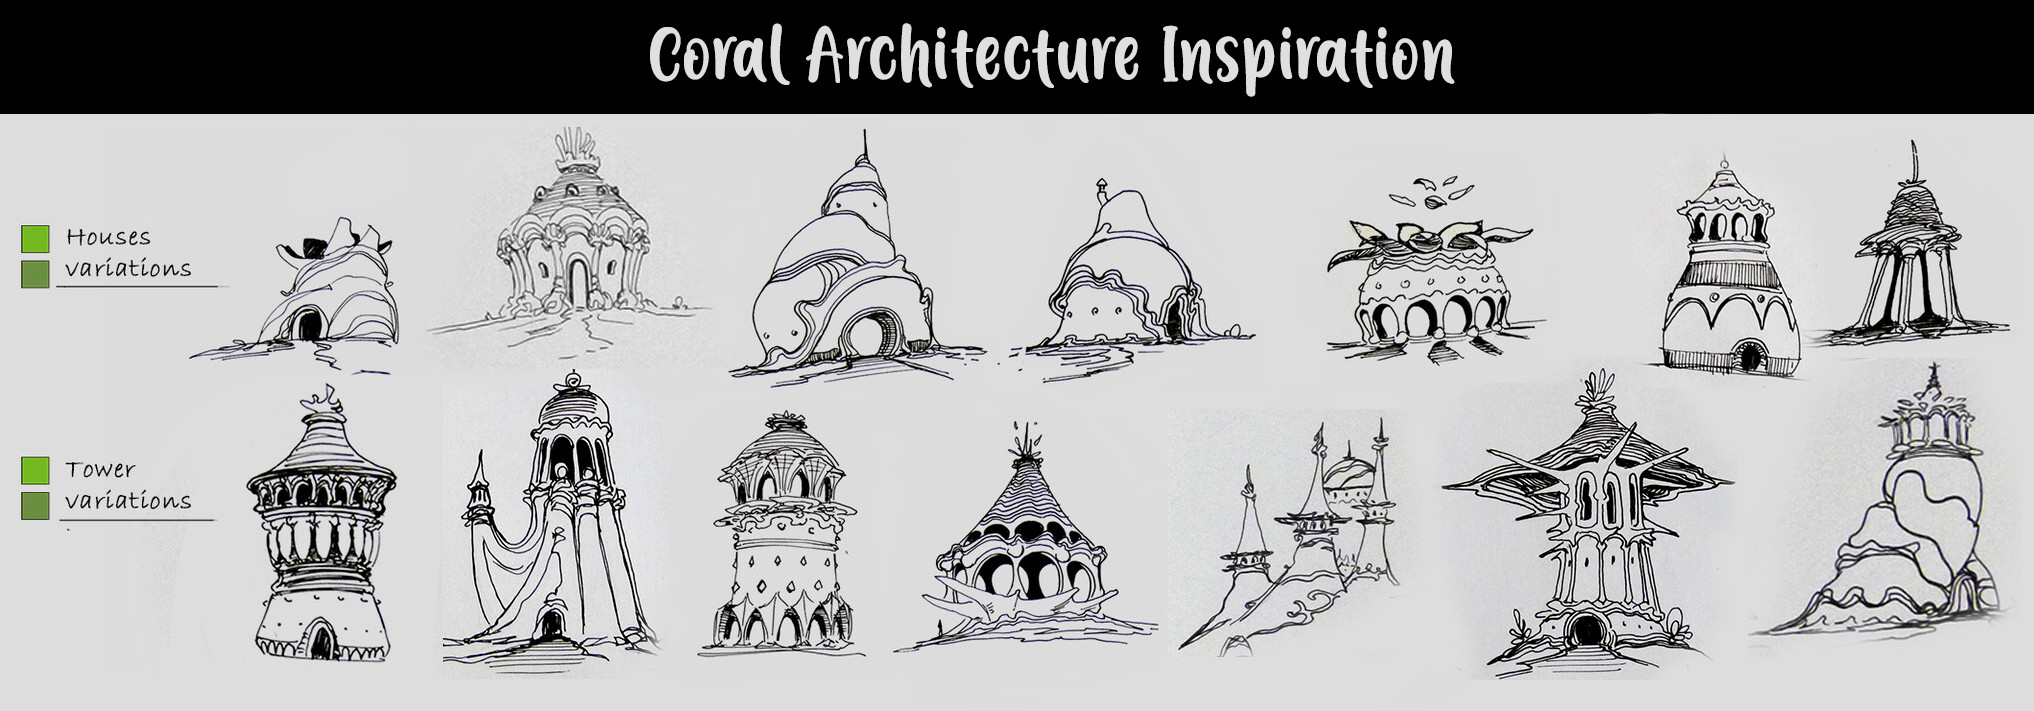 Architecture sketches made by Victor Fritsch. I decided to use these as inspiration for my buildings instead of the ones in his final concept painting